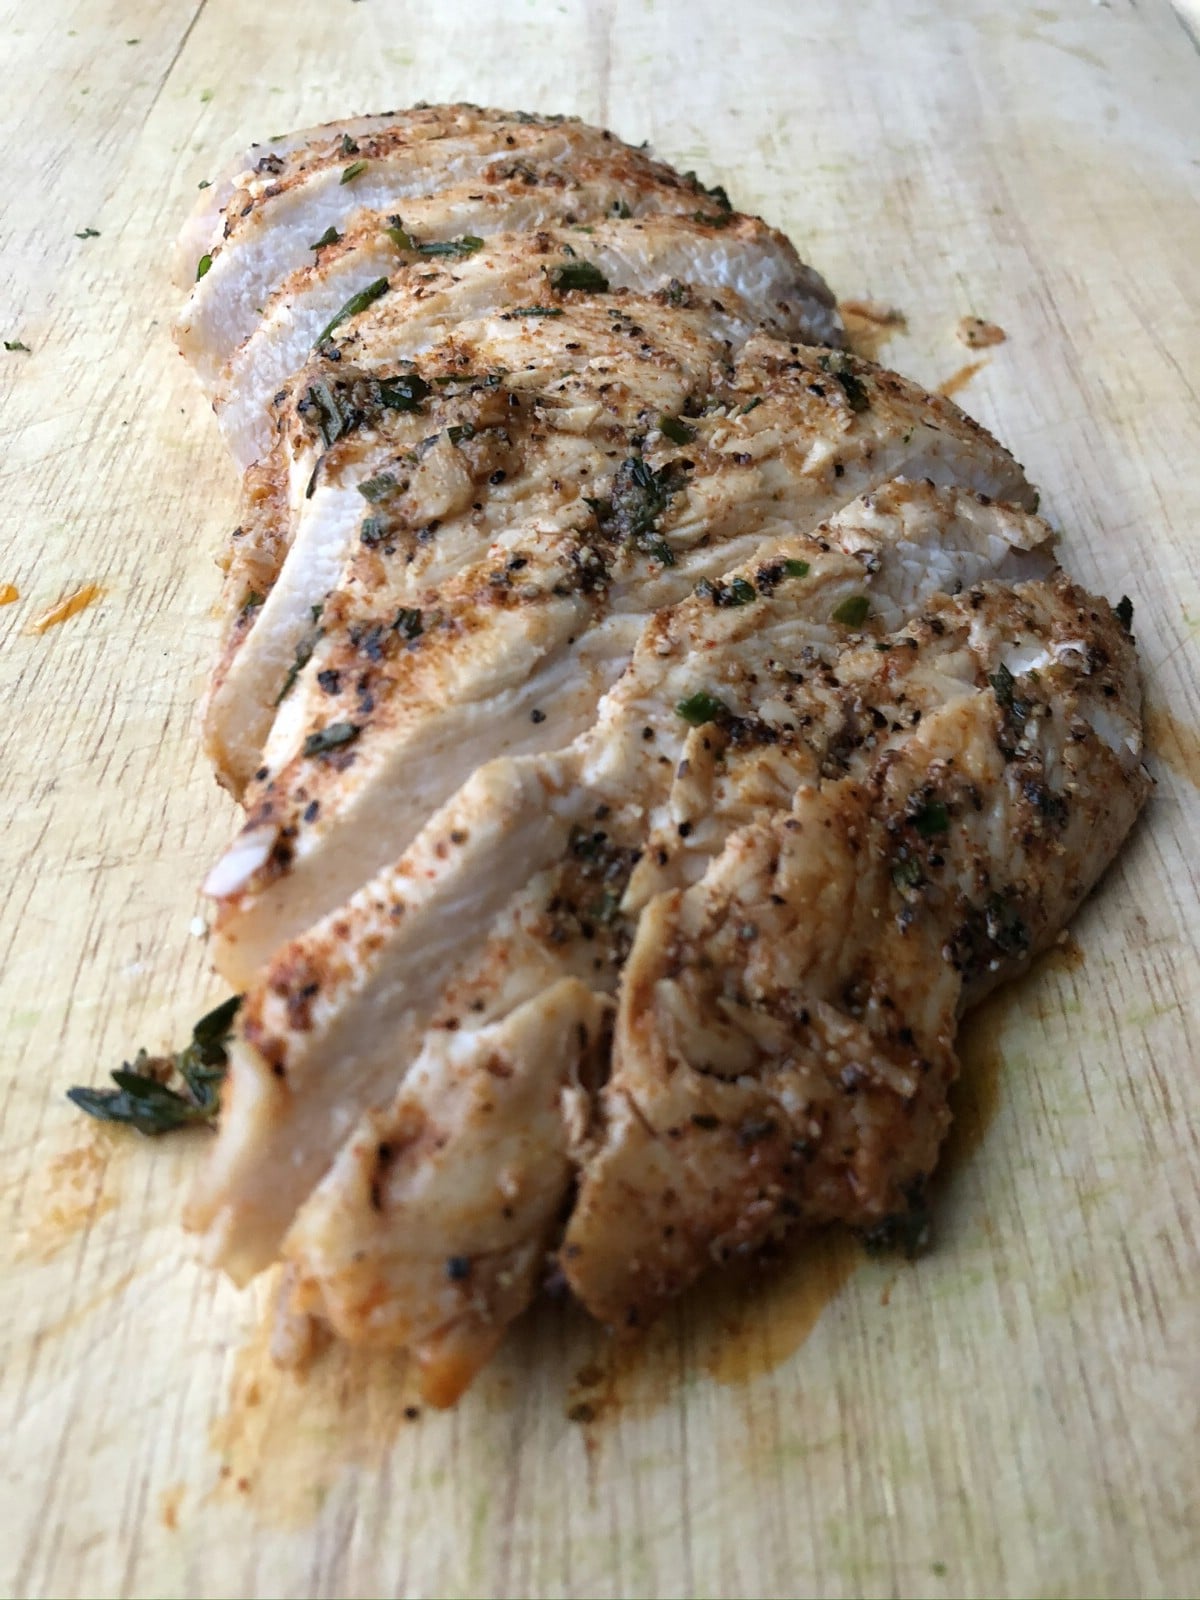 Sliced cooked chicken on cutting board